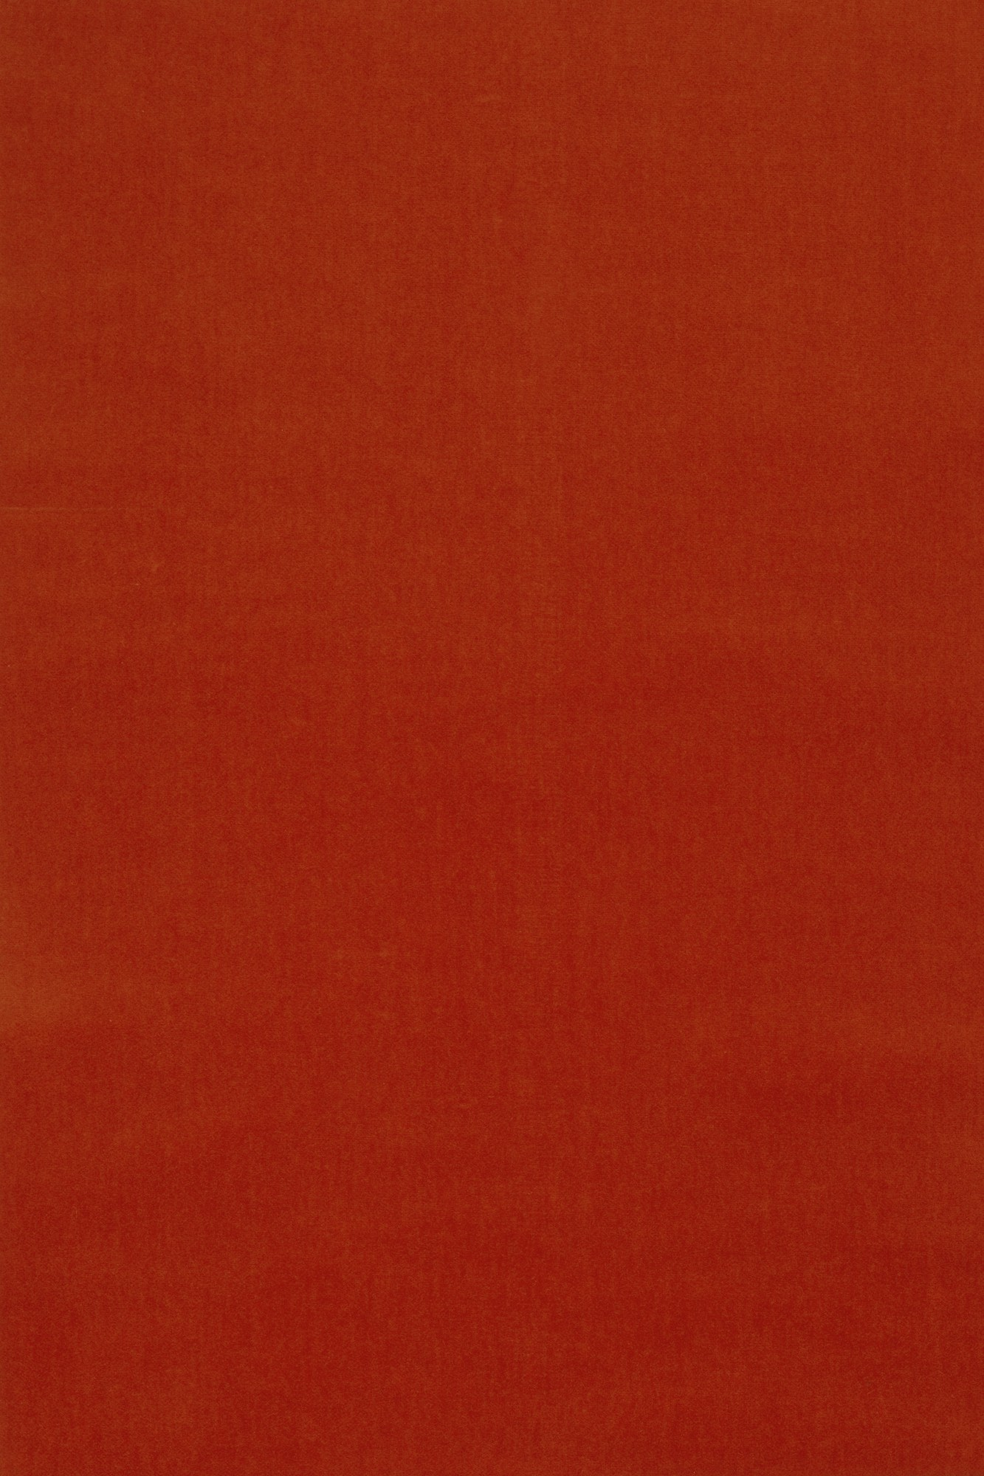 Fabric sample Harald 3 512 red